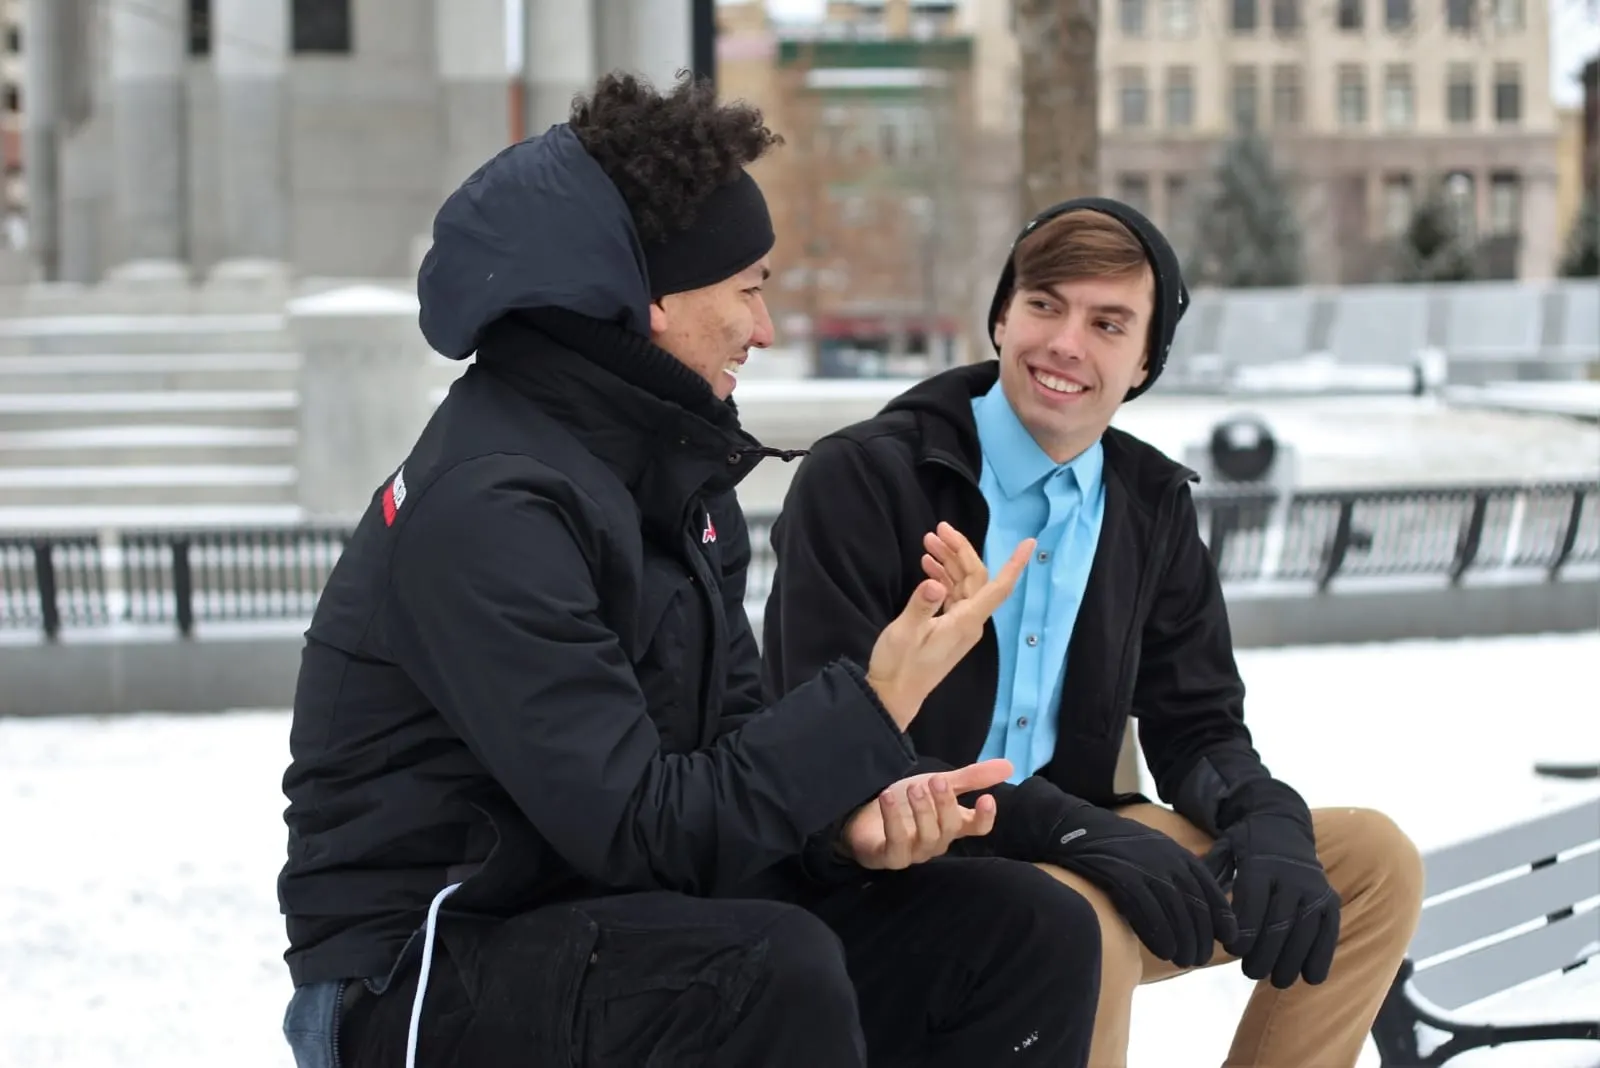 two men talking while sitting outdoor in winter